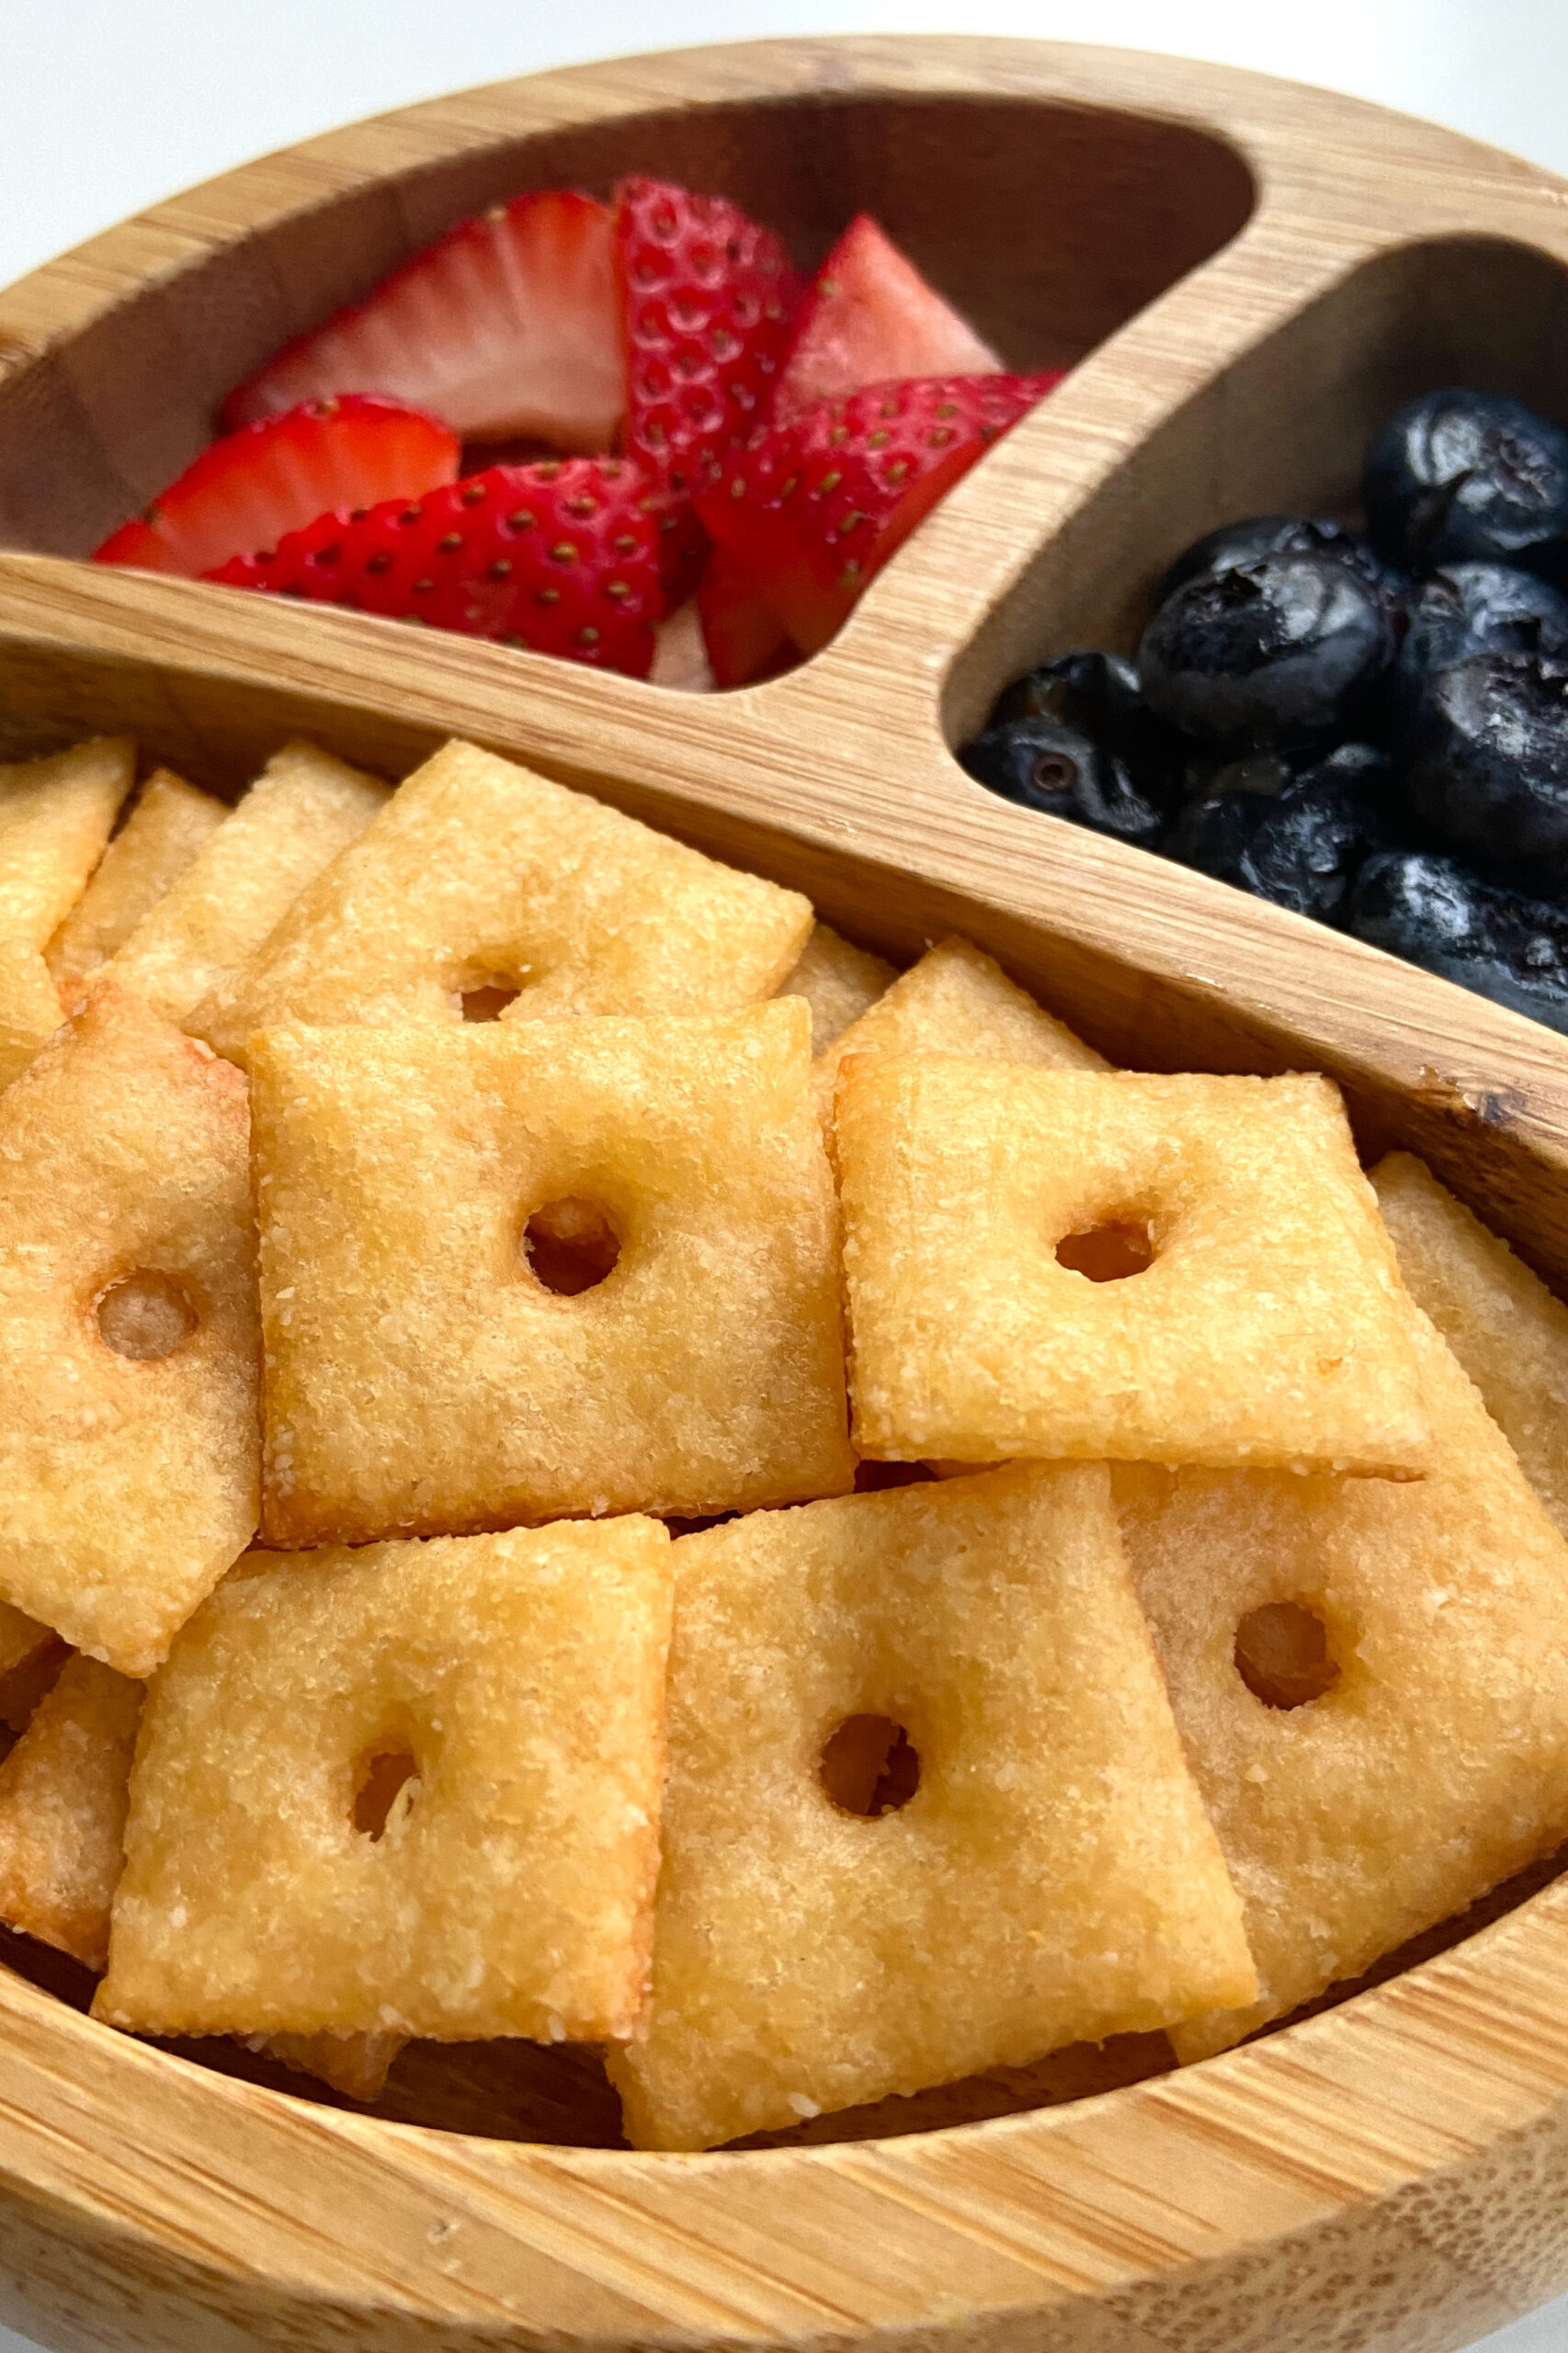 Homemade cheez-it crackers served with strawberries and blueberries